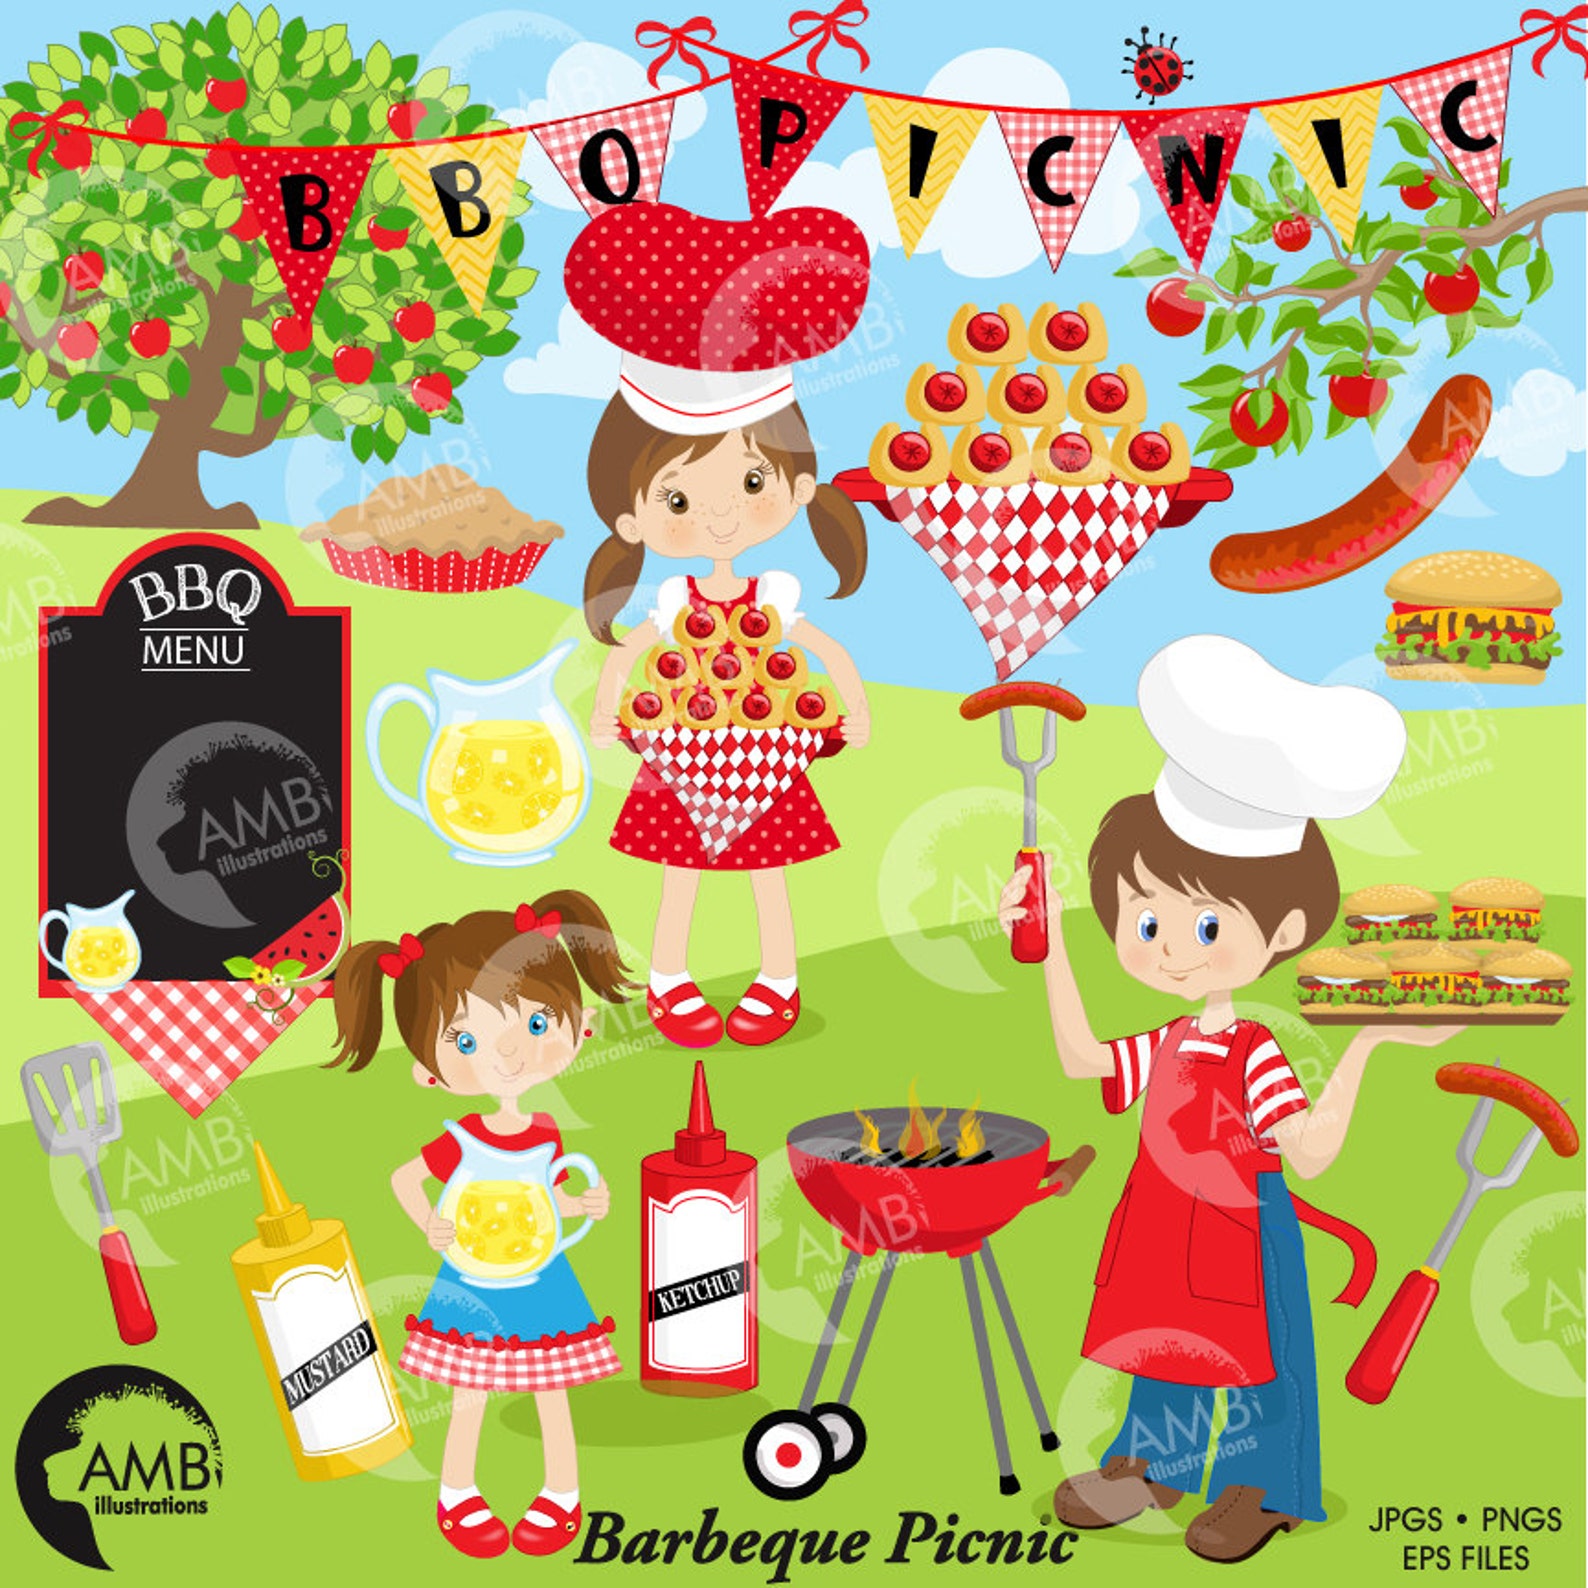 BBQ clipart Picnic clipart Barbecue clipart Grill food image 1.